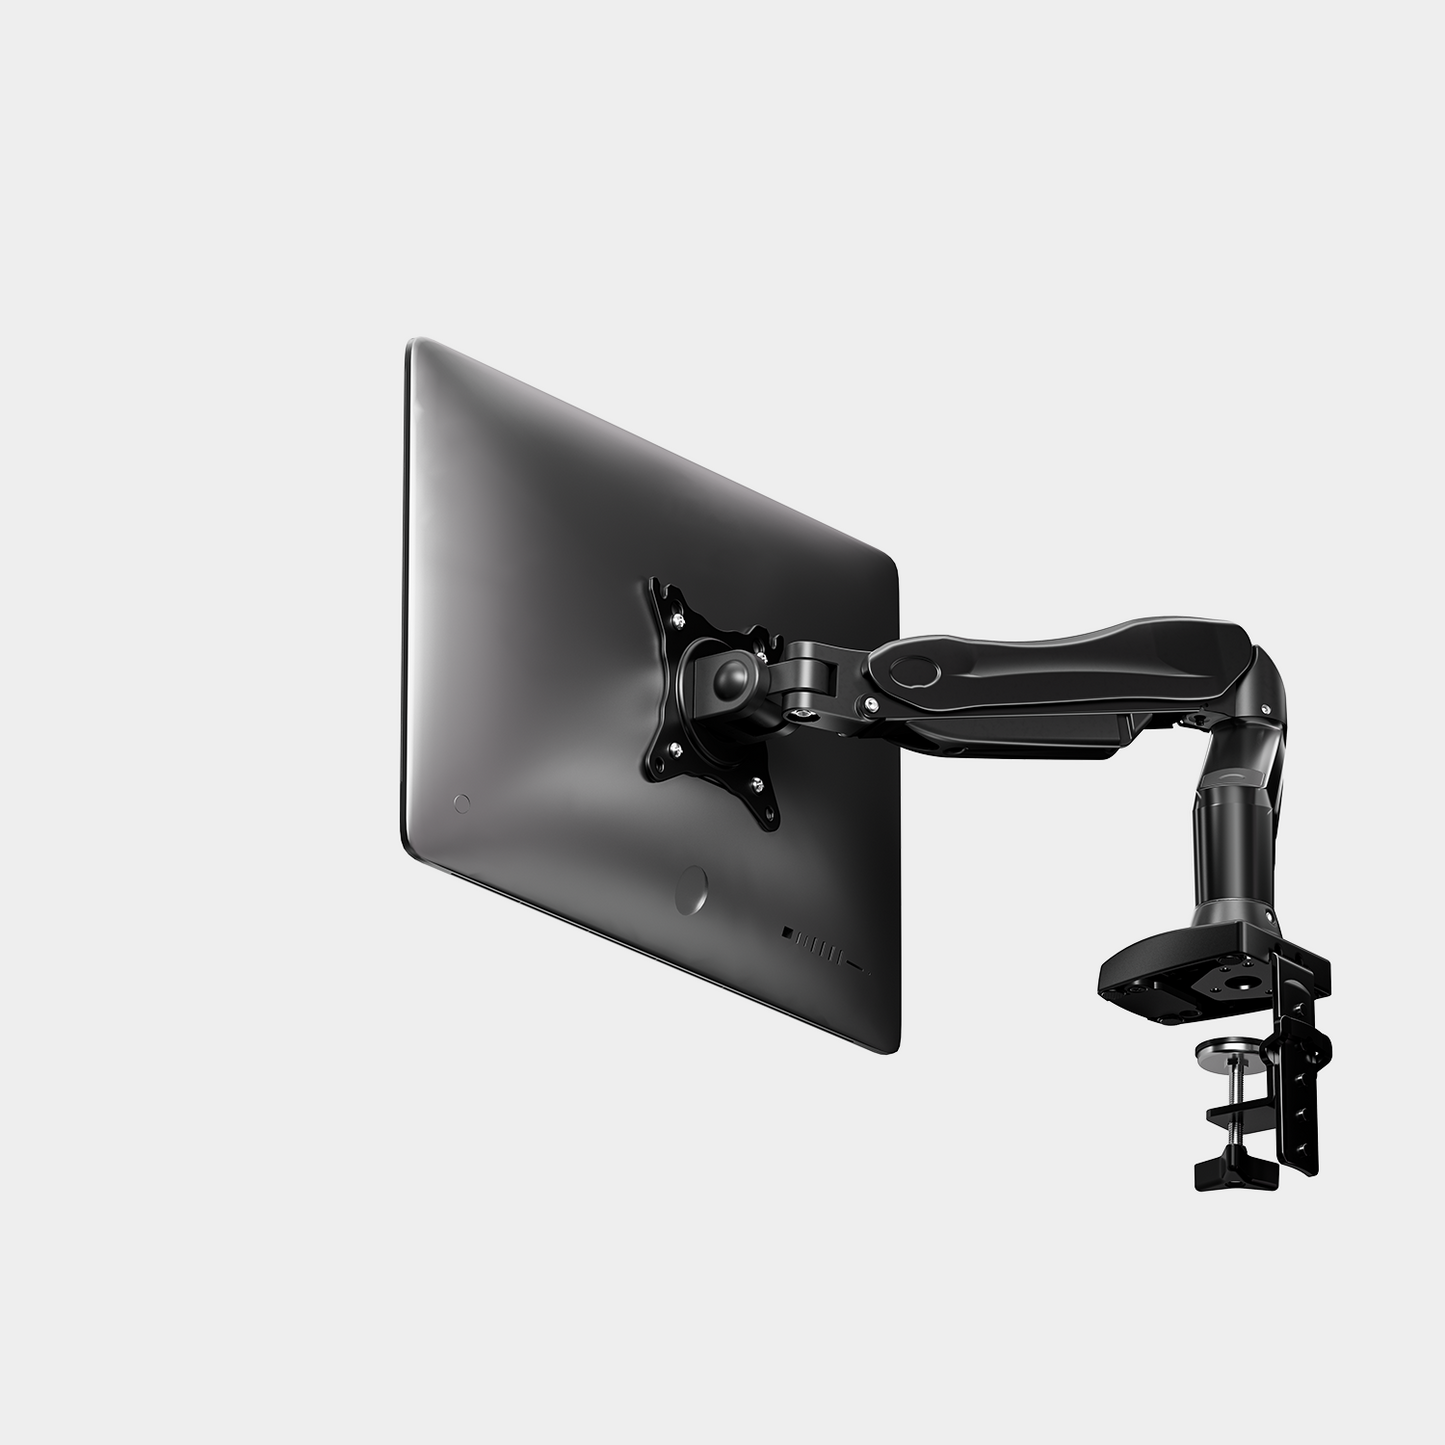 Single Monitor Mount For 13" To 32" Screens